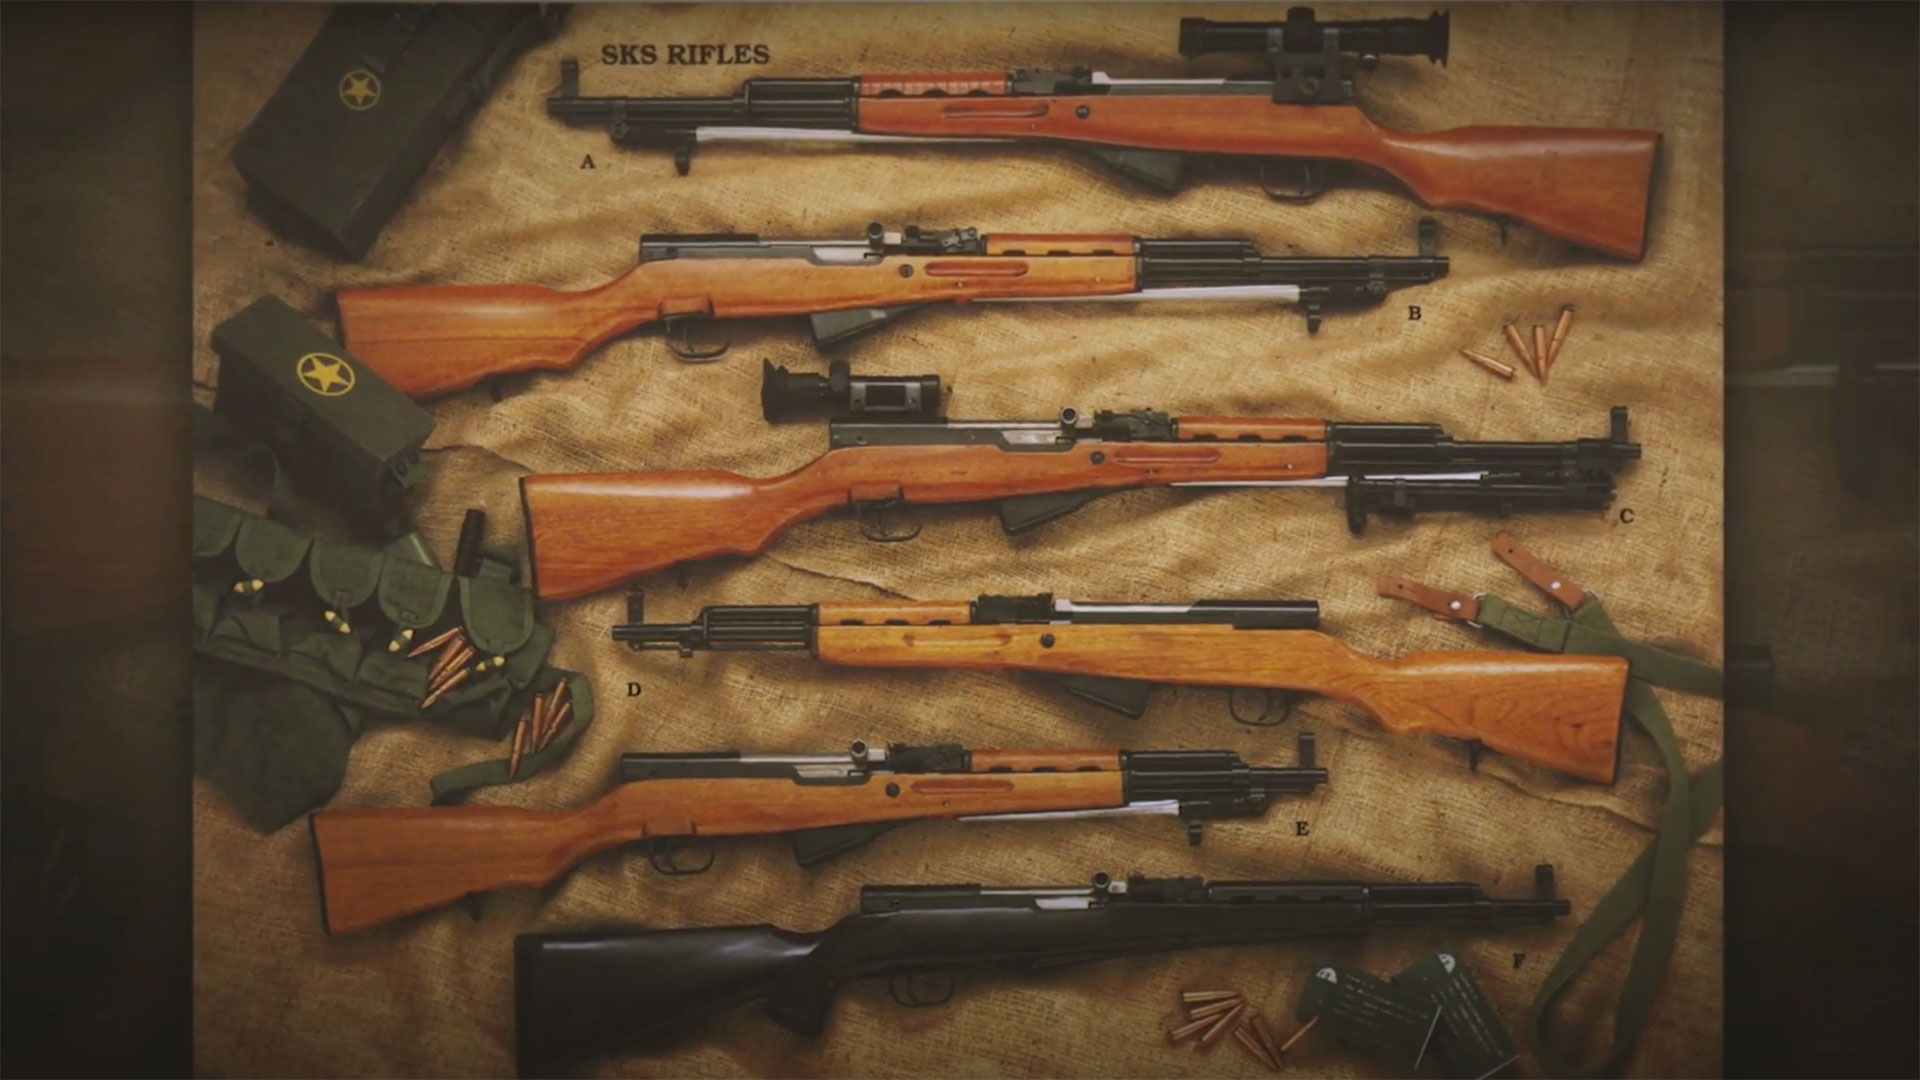 Some examples of different version of the SKS.